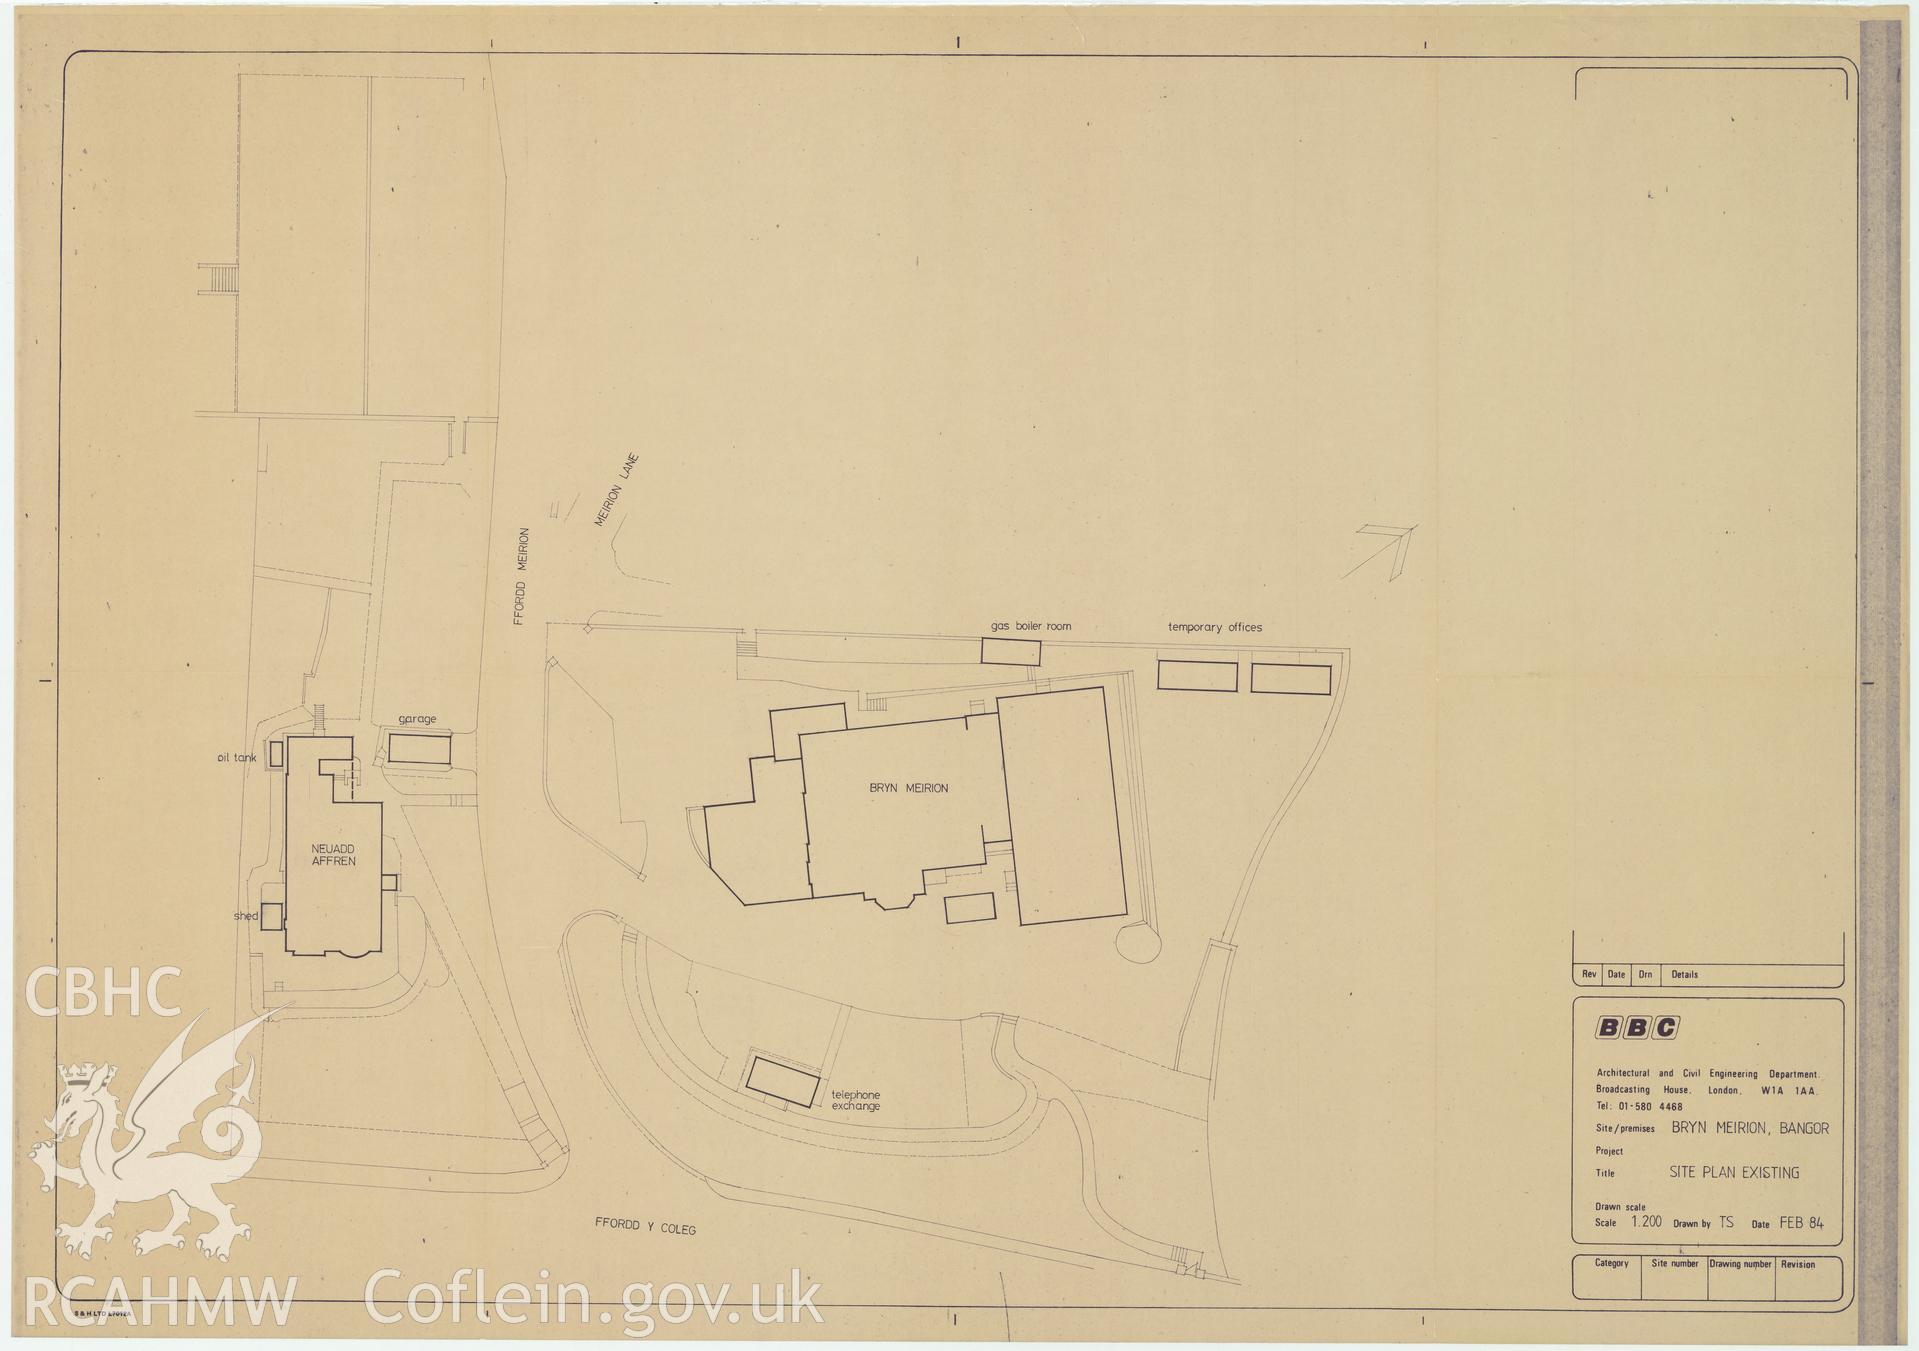 BBC premises, Broadcasting House, Bangor - existing site plans of Bryn Meirion. February 1984.